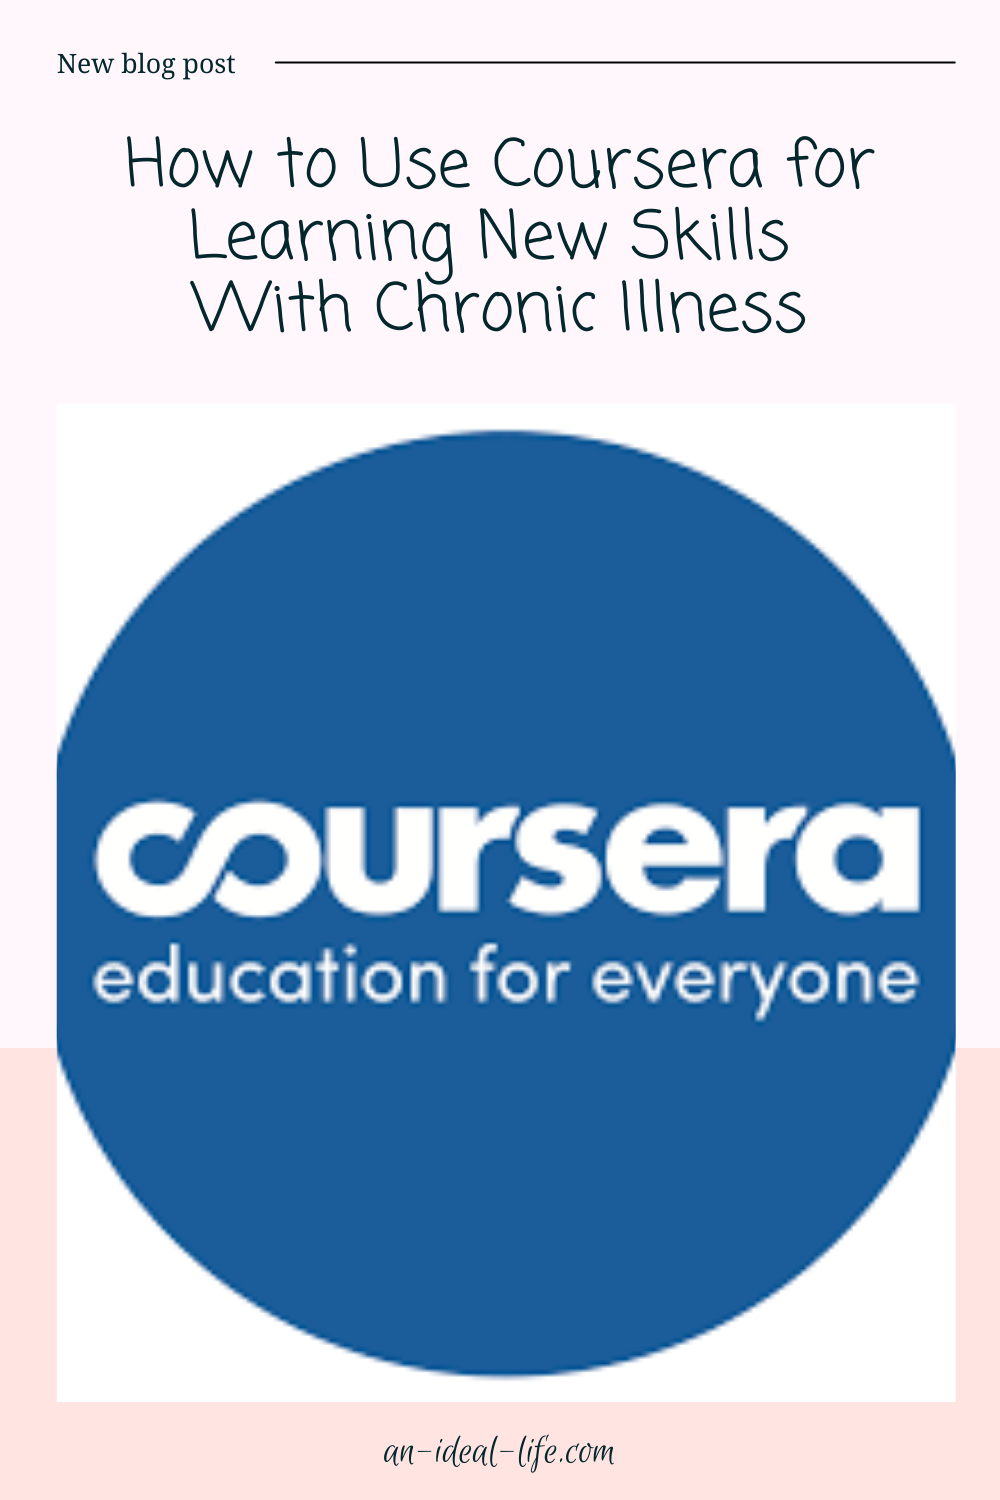 How to Use Coursera for Learning New Skills With Chronic Illness